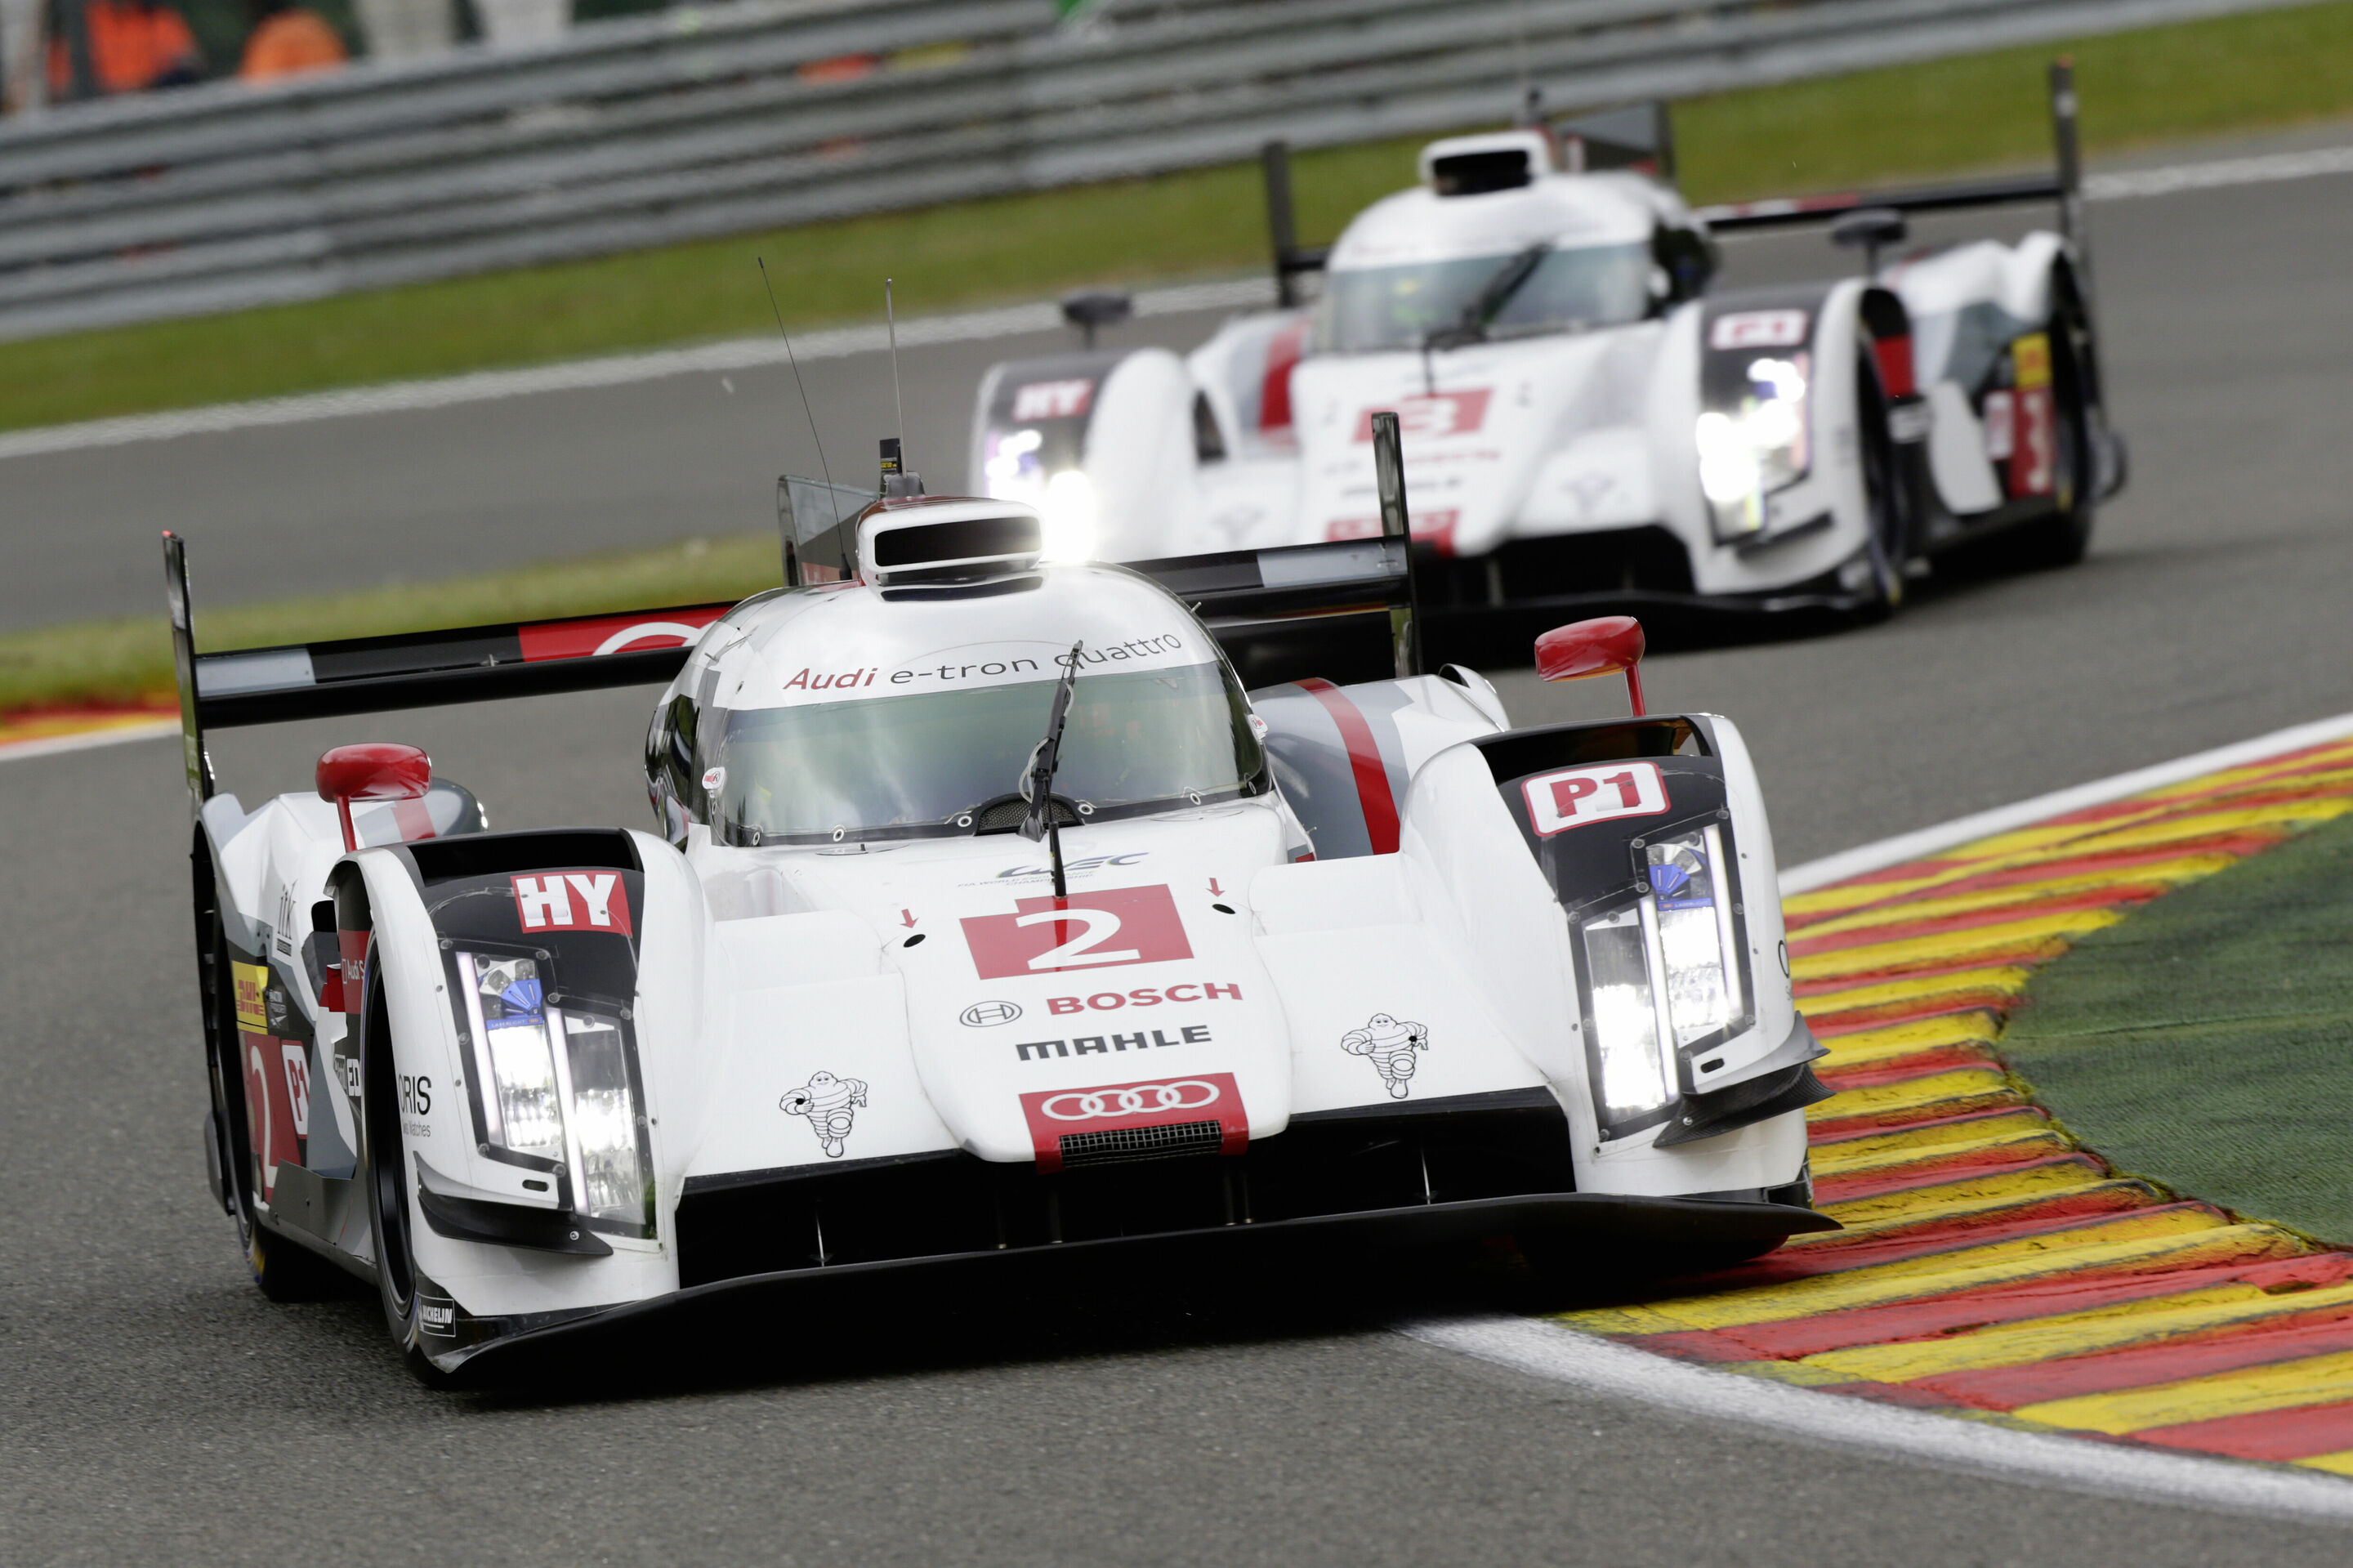 Audi with solid starting base at Spa